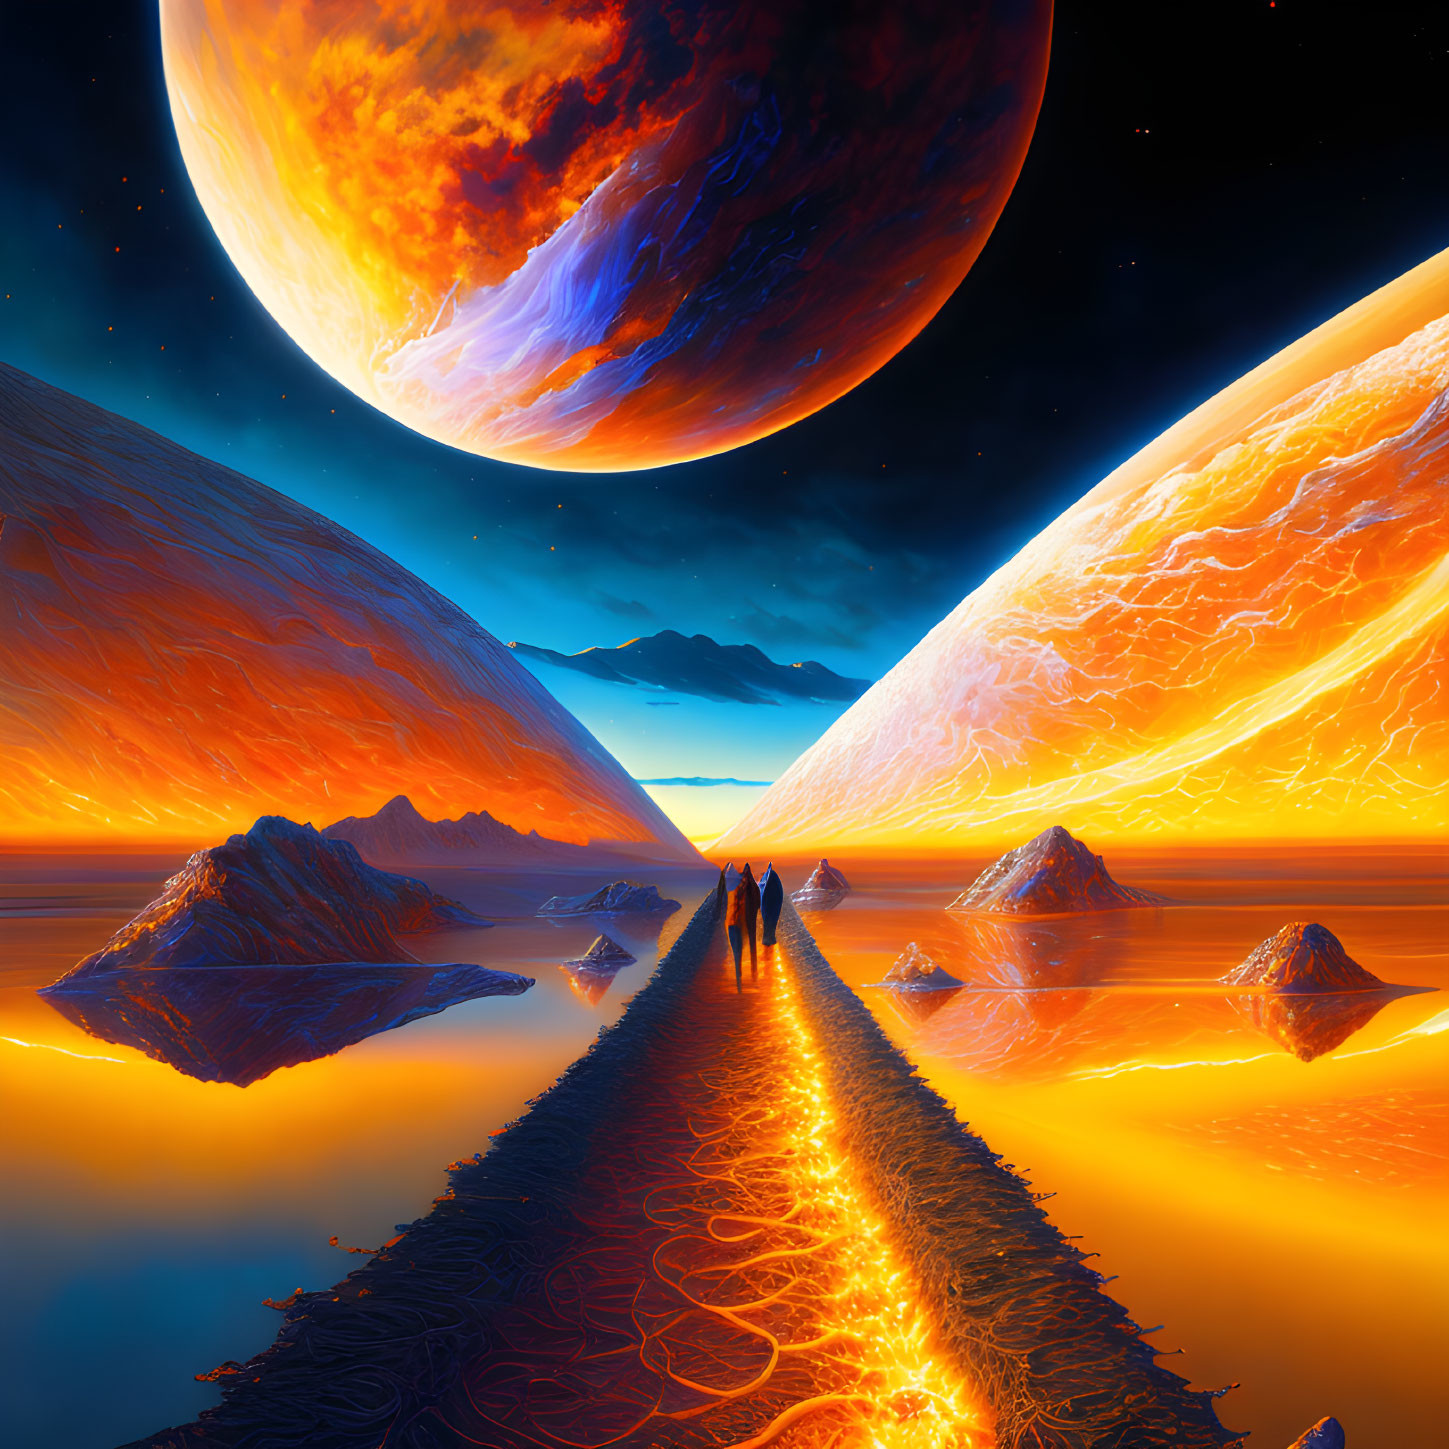 Colorful Sci-Fi Landscape with Fiery Planets, Moon, and Water Reflections